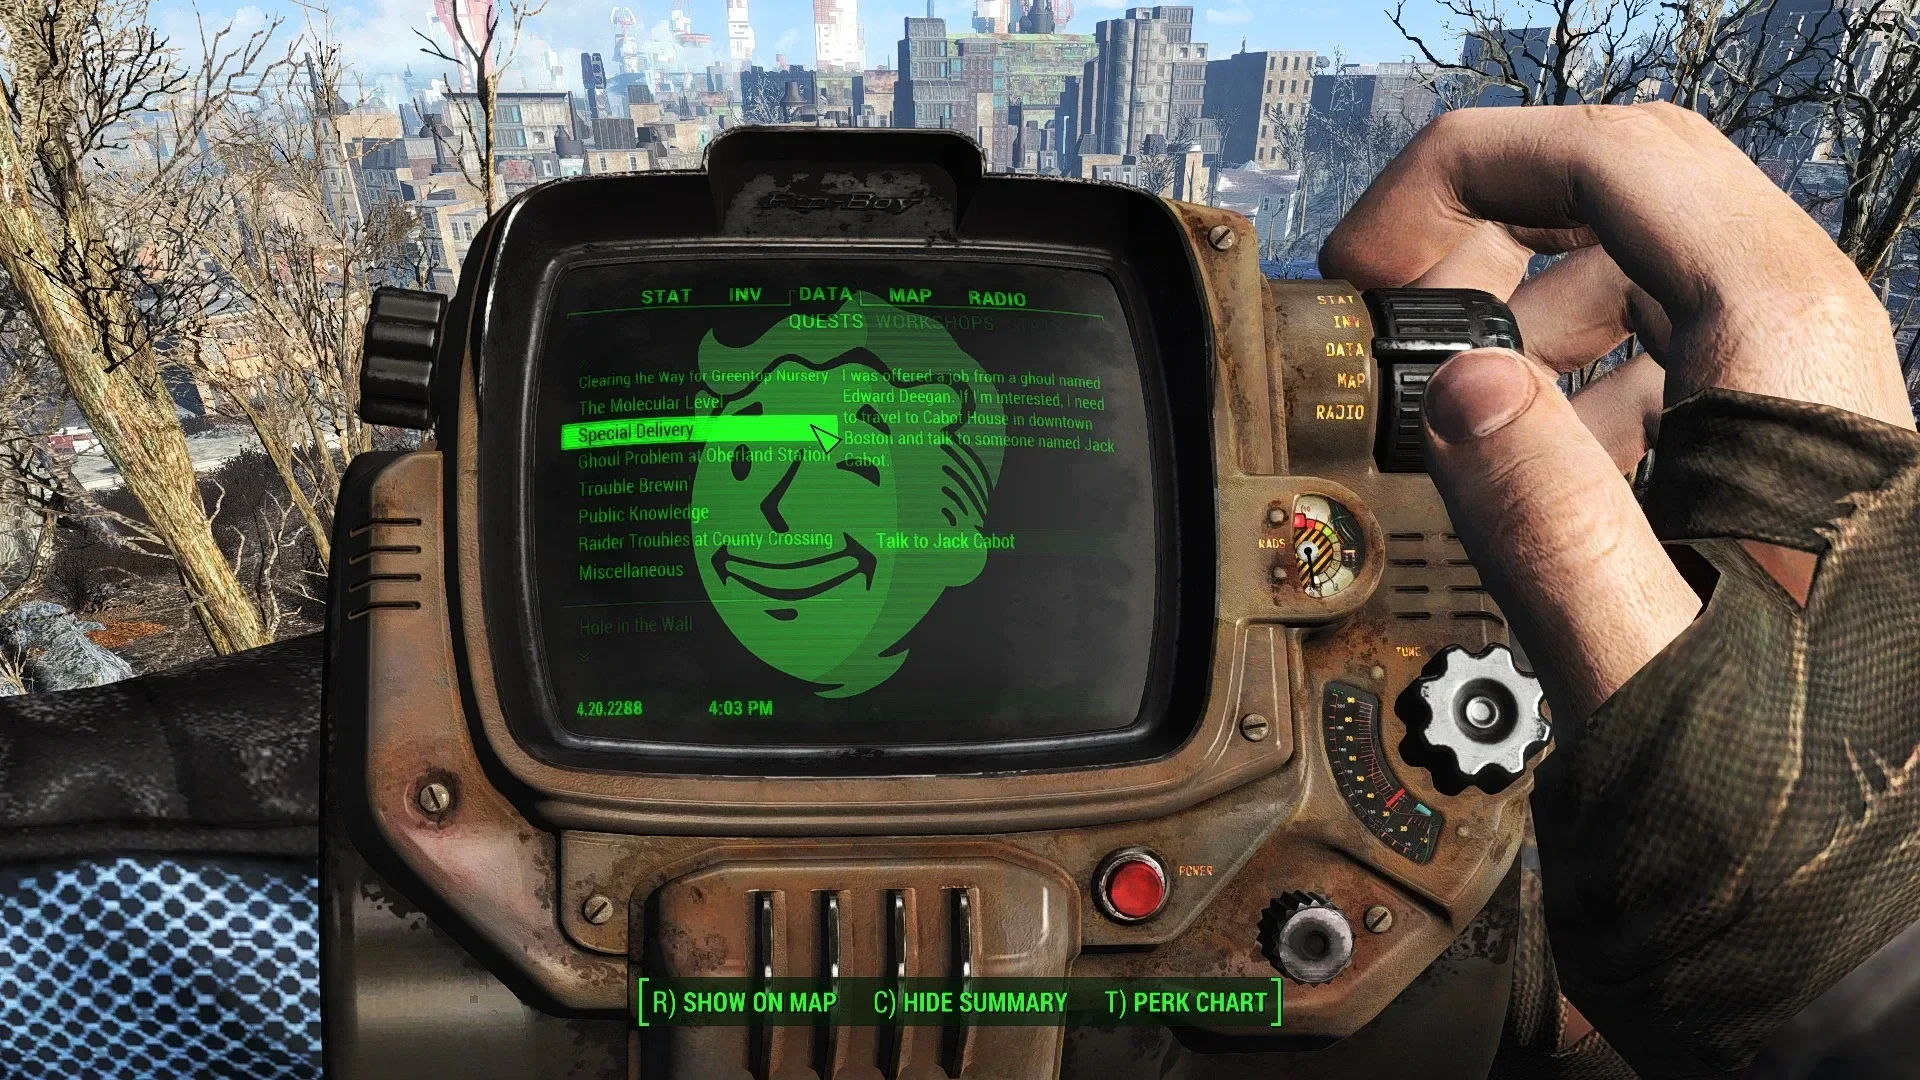 Bethesda released Pip-boy in honor of the upcoming Fallout series